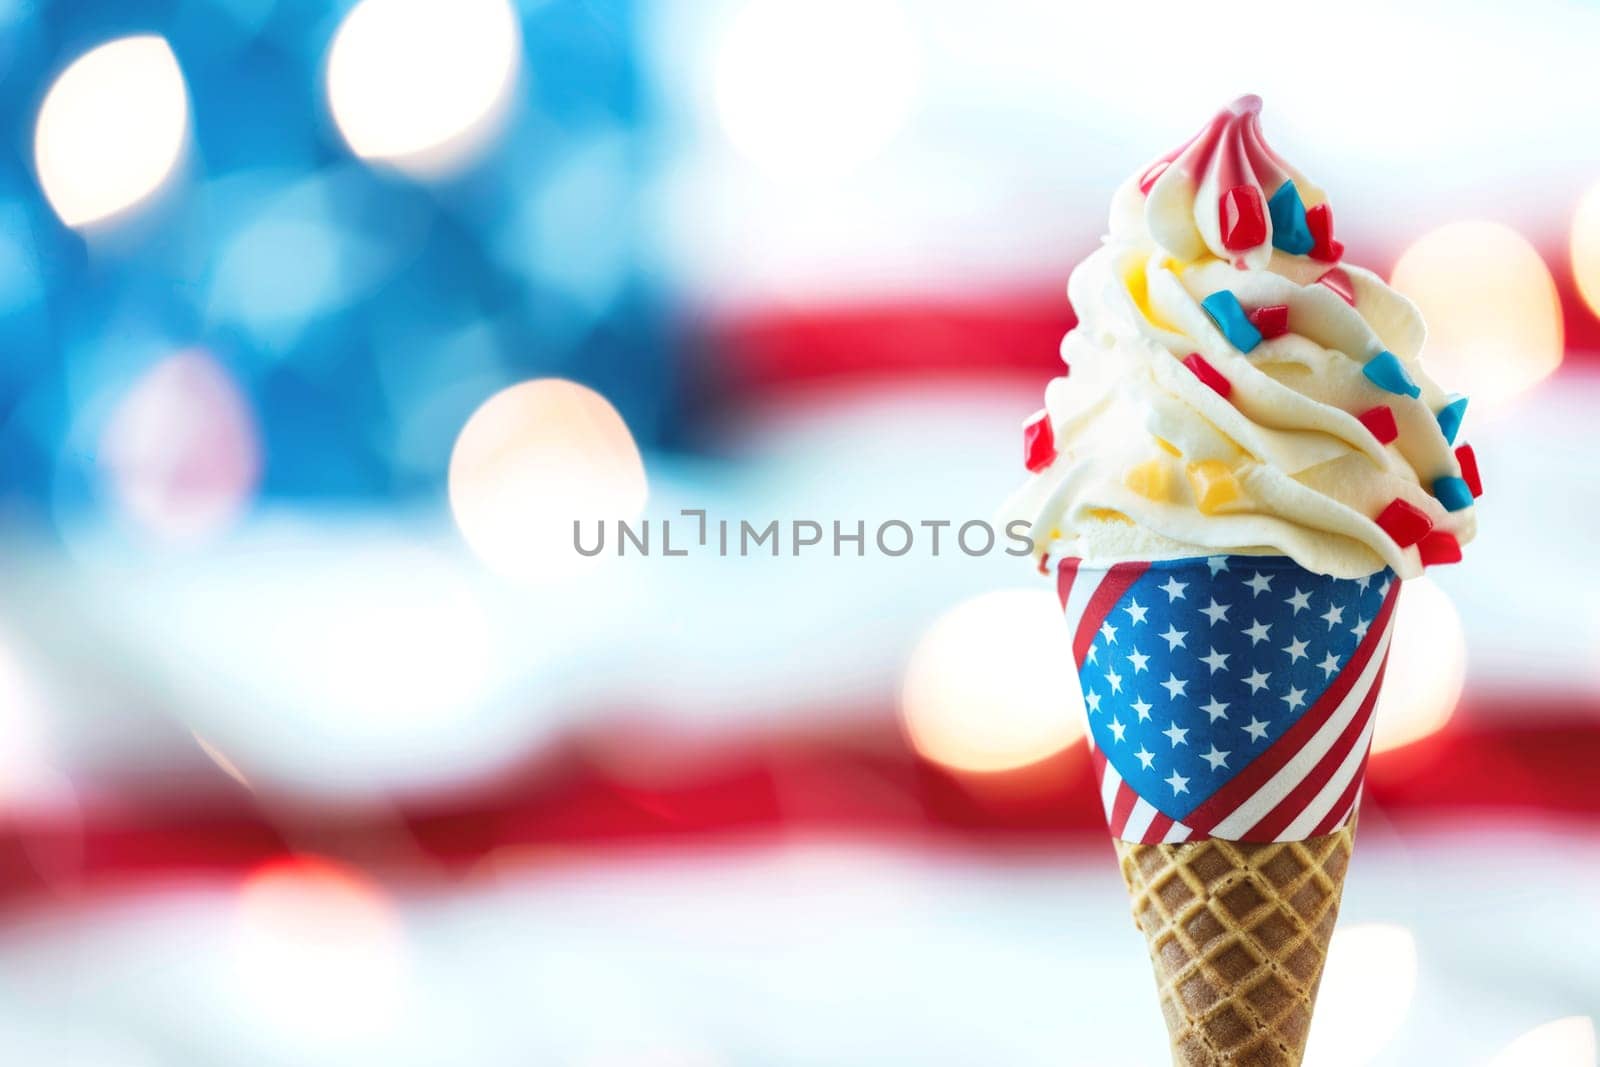 A festive ice cream cone with red, white, and blue stripes, topped with a small American flag, against a beach background under sunlight.